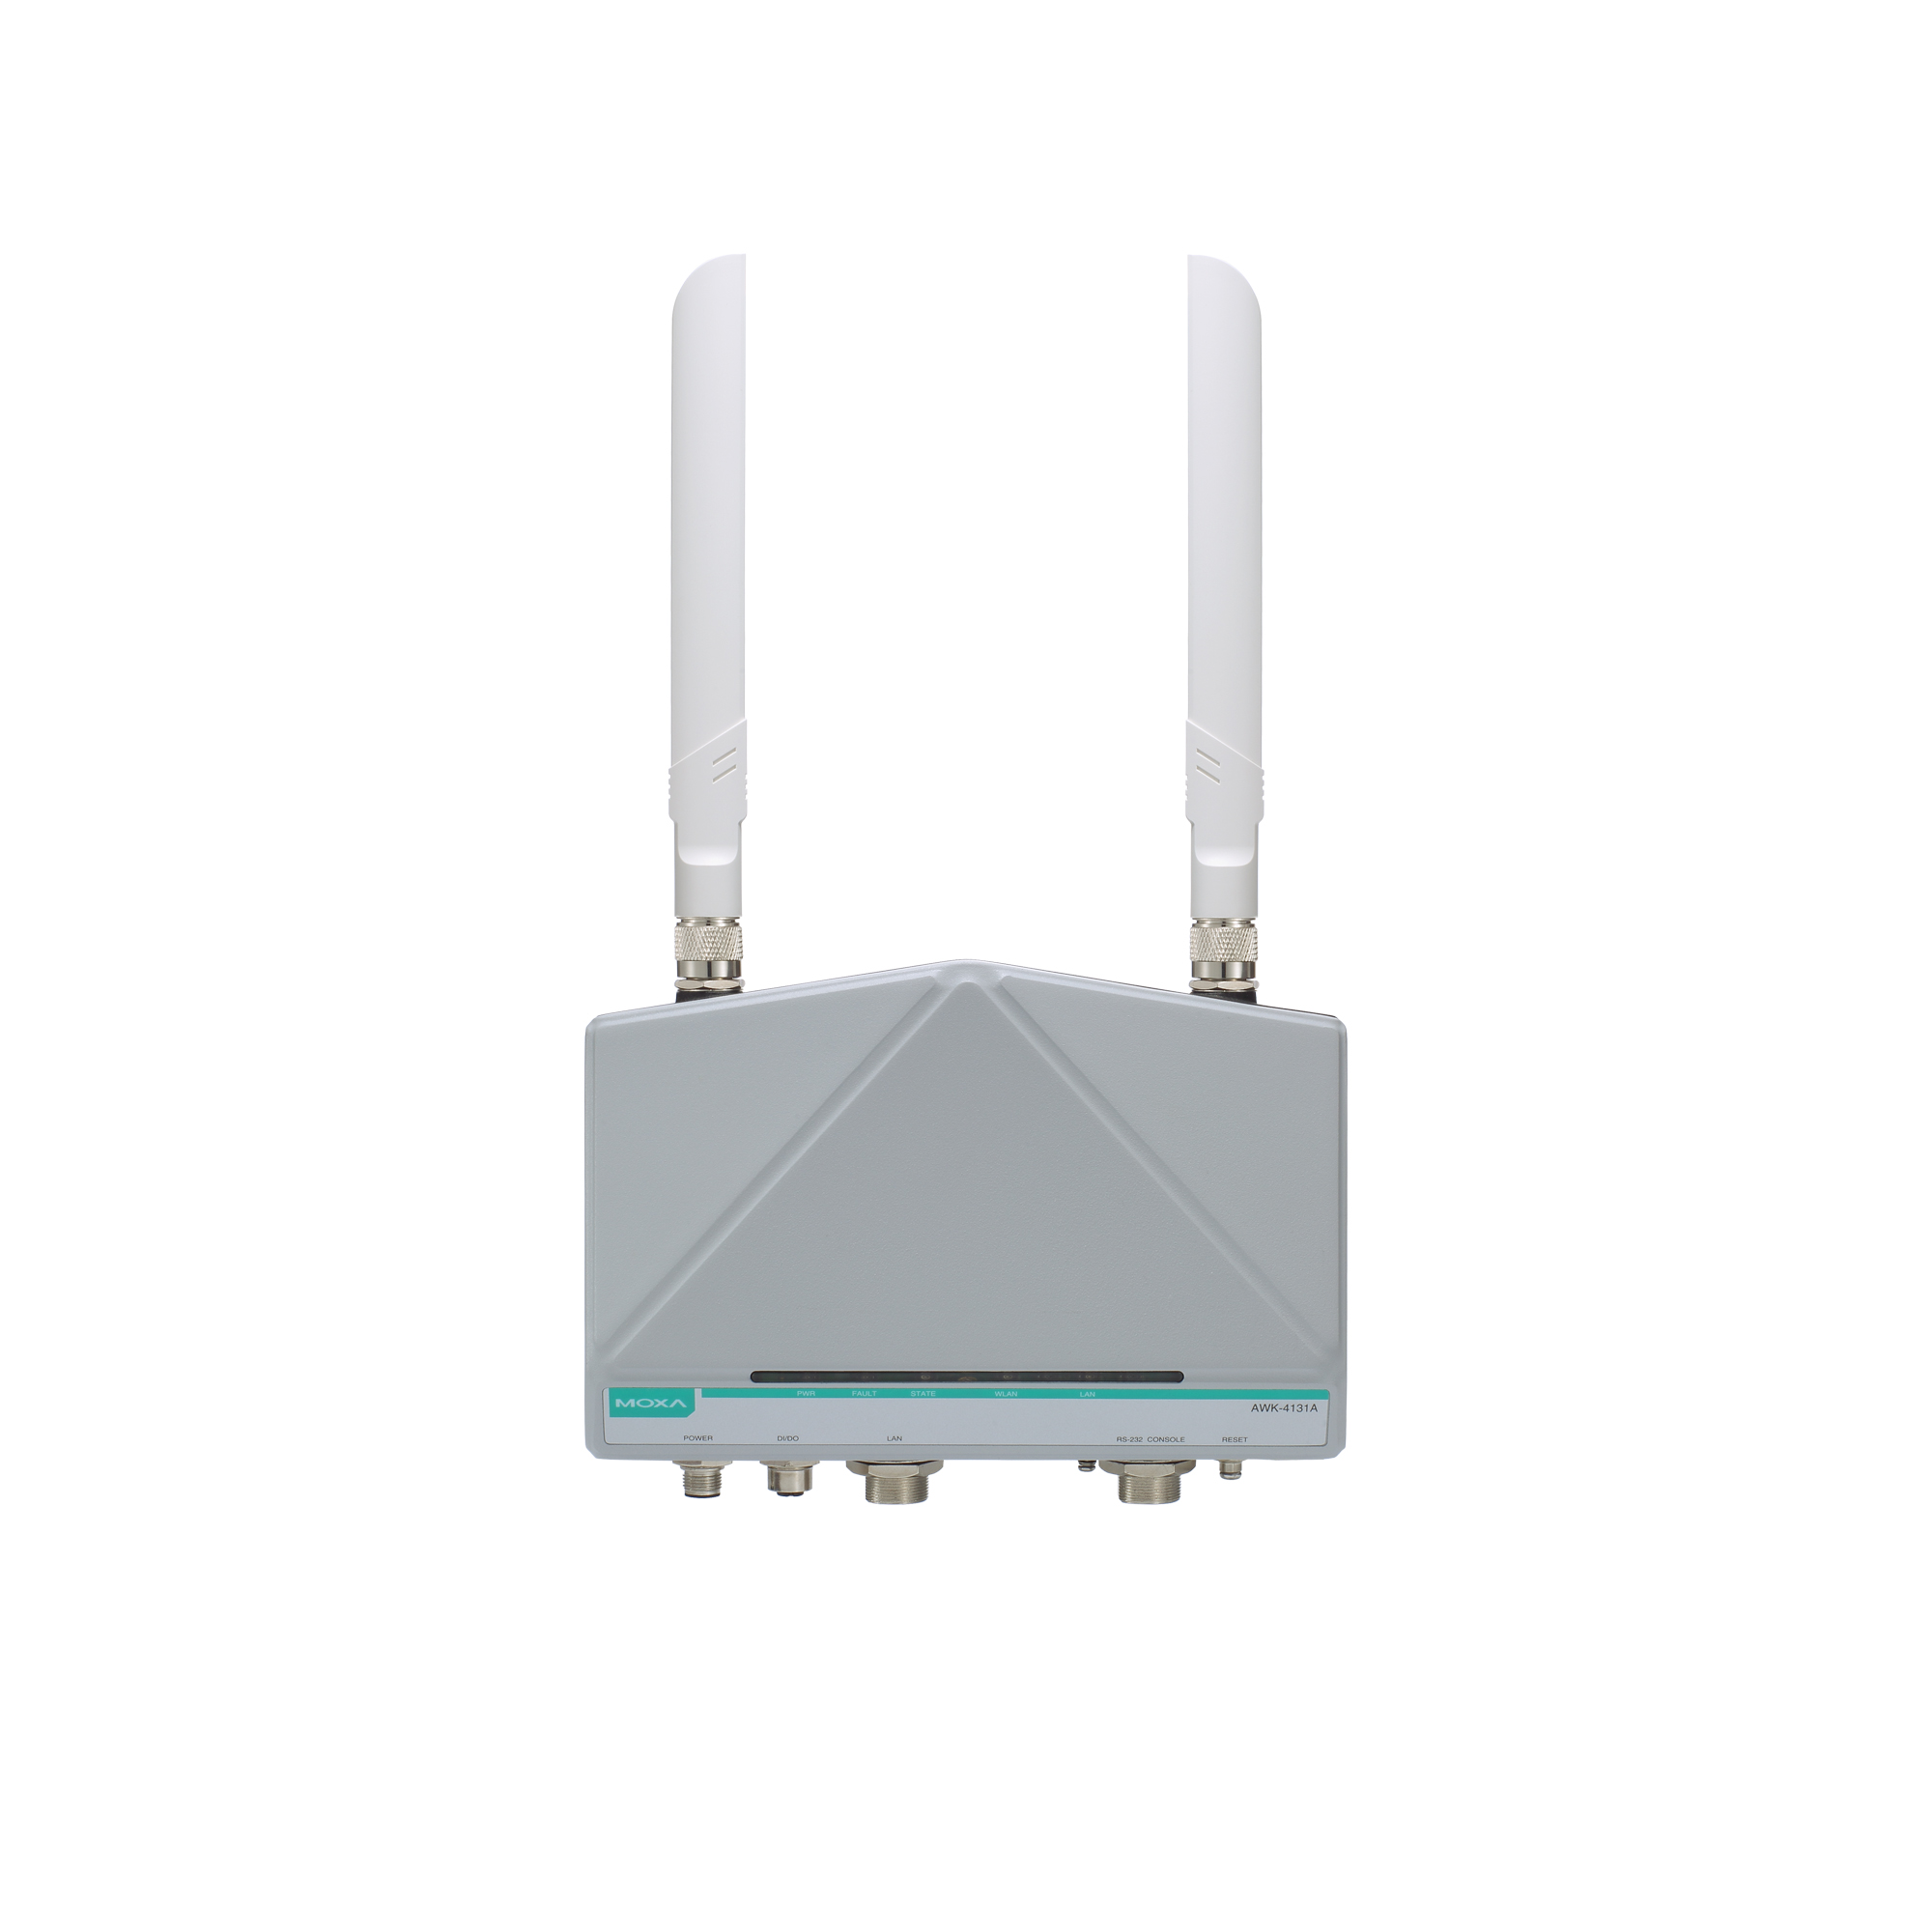 the 802.11 mac protocol for wireless access points uses